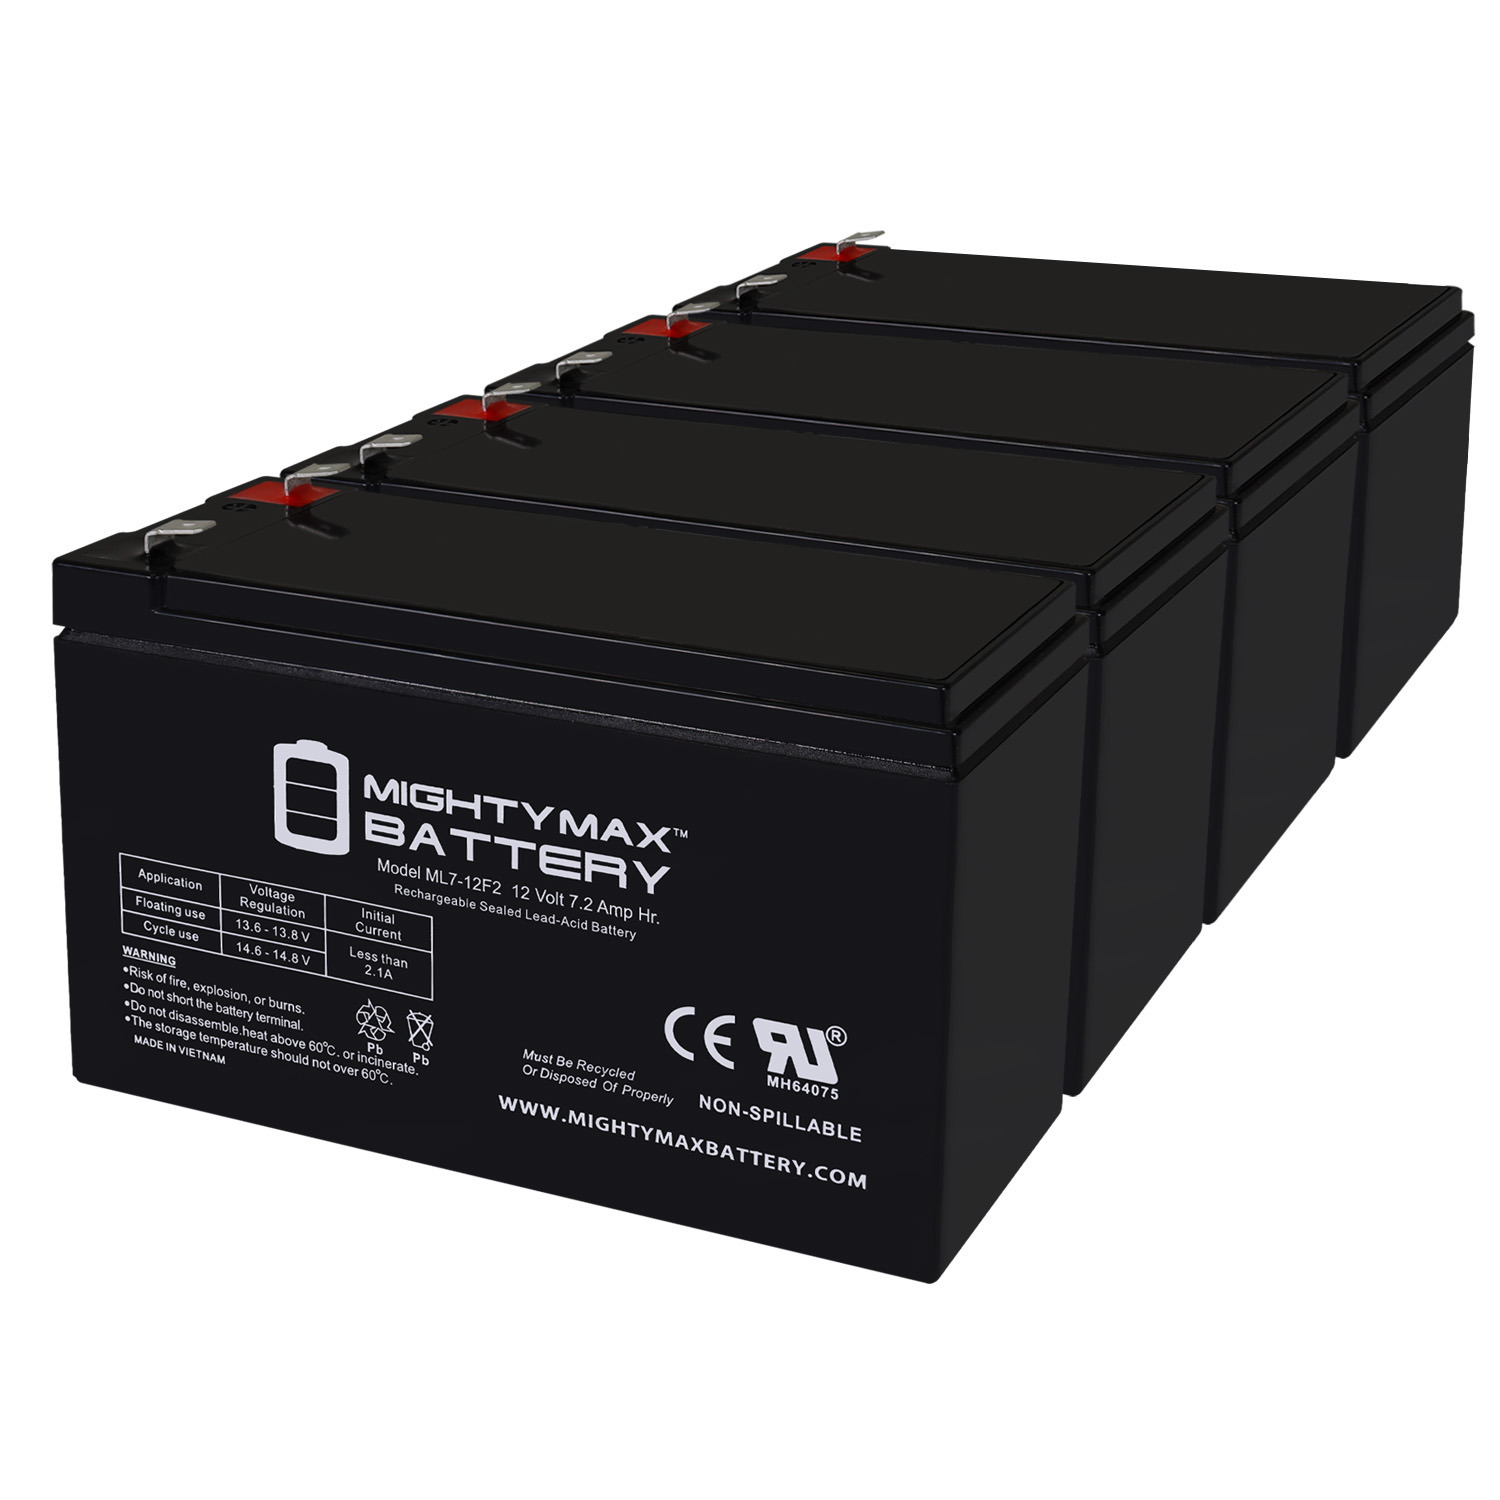 12V 7Ah F2 Replacement Battery for CyberPower Systems AVR 1000AVR - 4 Pack